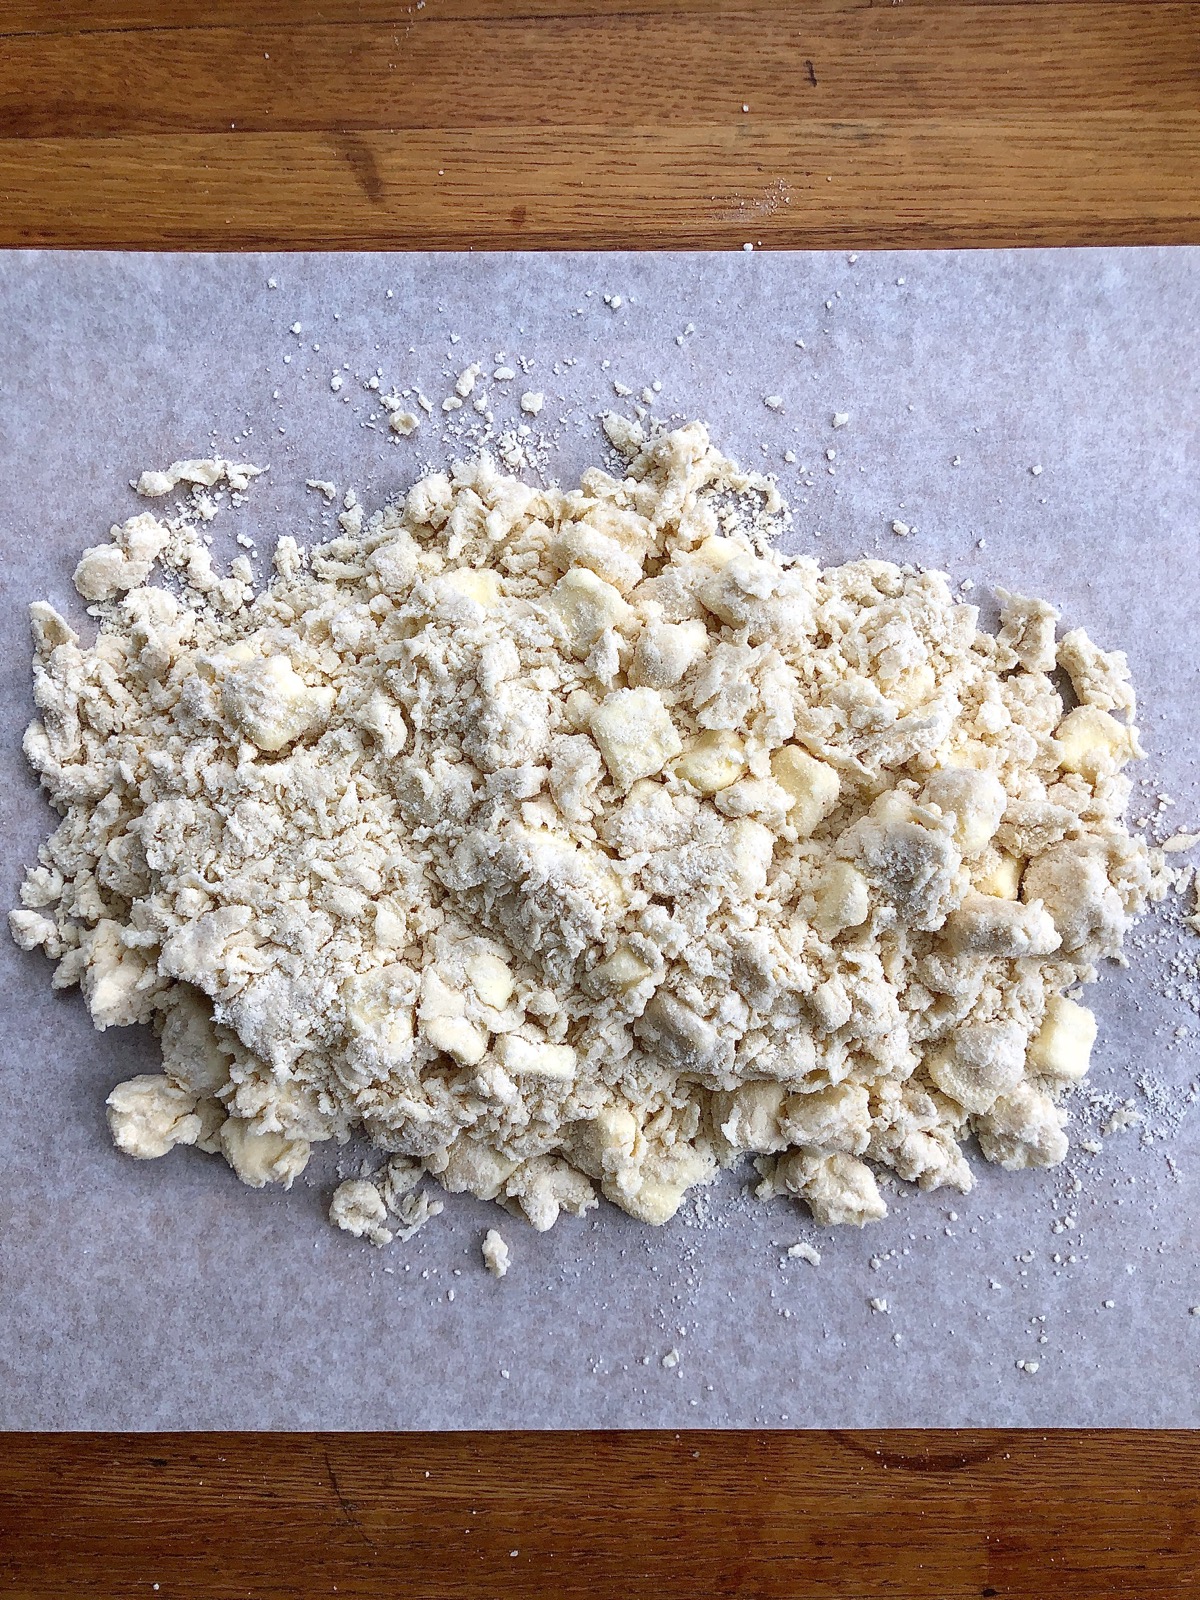 Dry clumps of pie crust dough on a sheet of parchment.